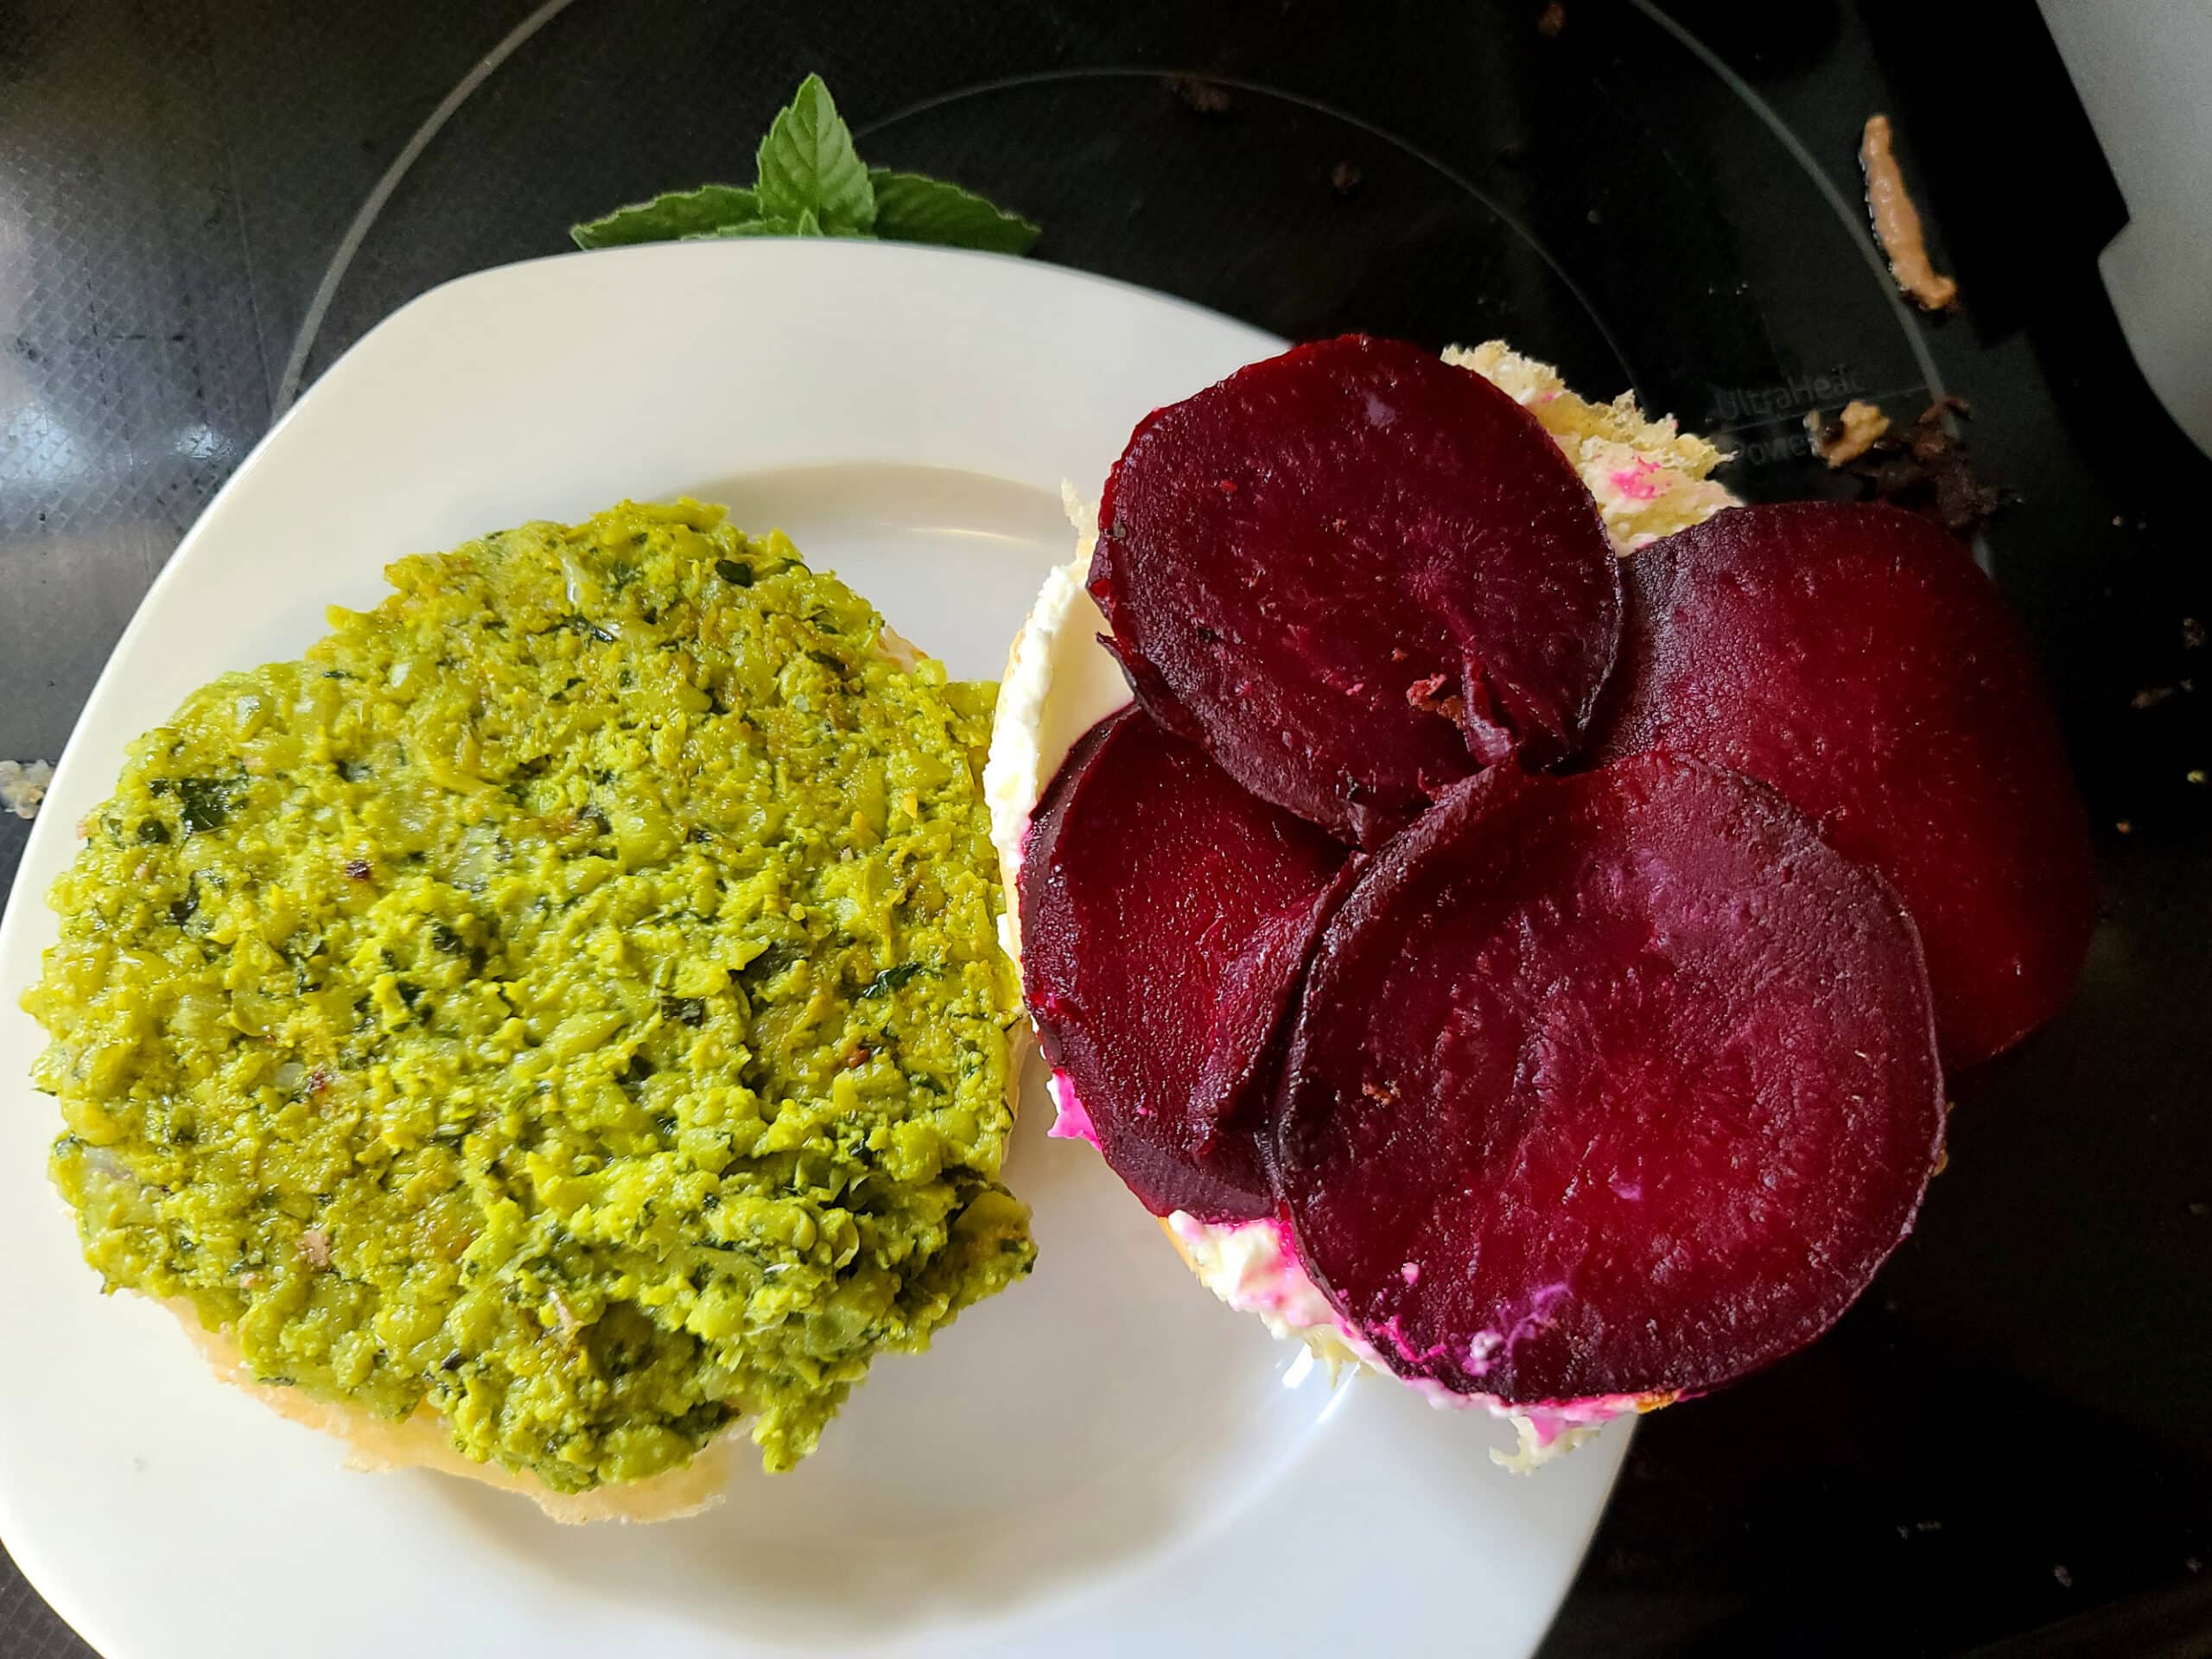 A bun prepared with goat cheese spread, roasted beets, and pea hummus.